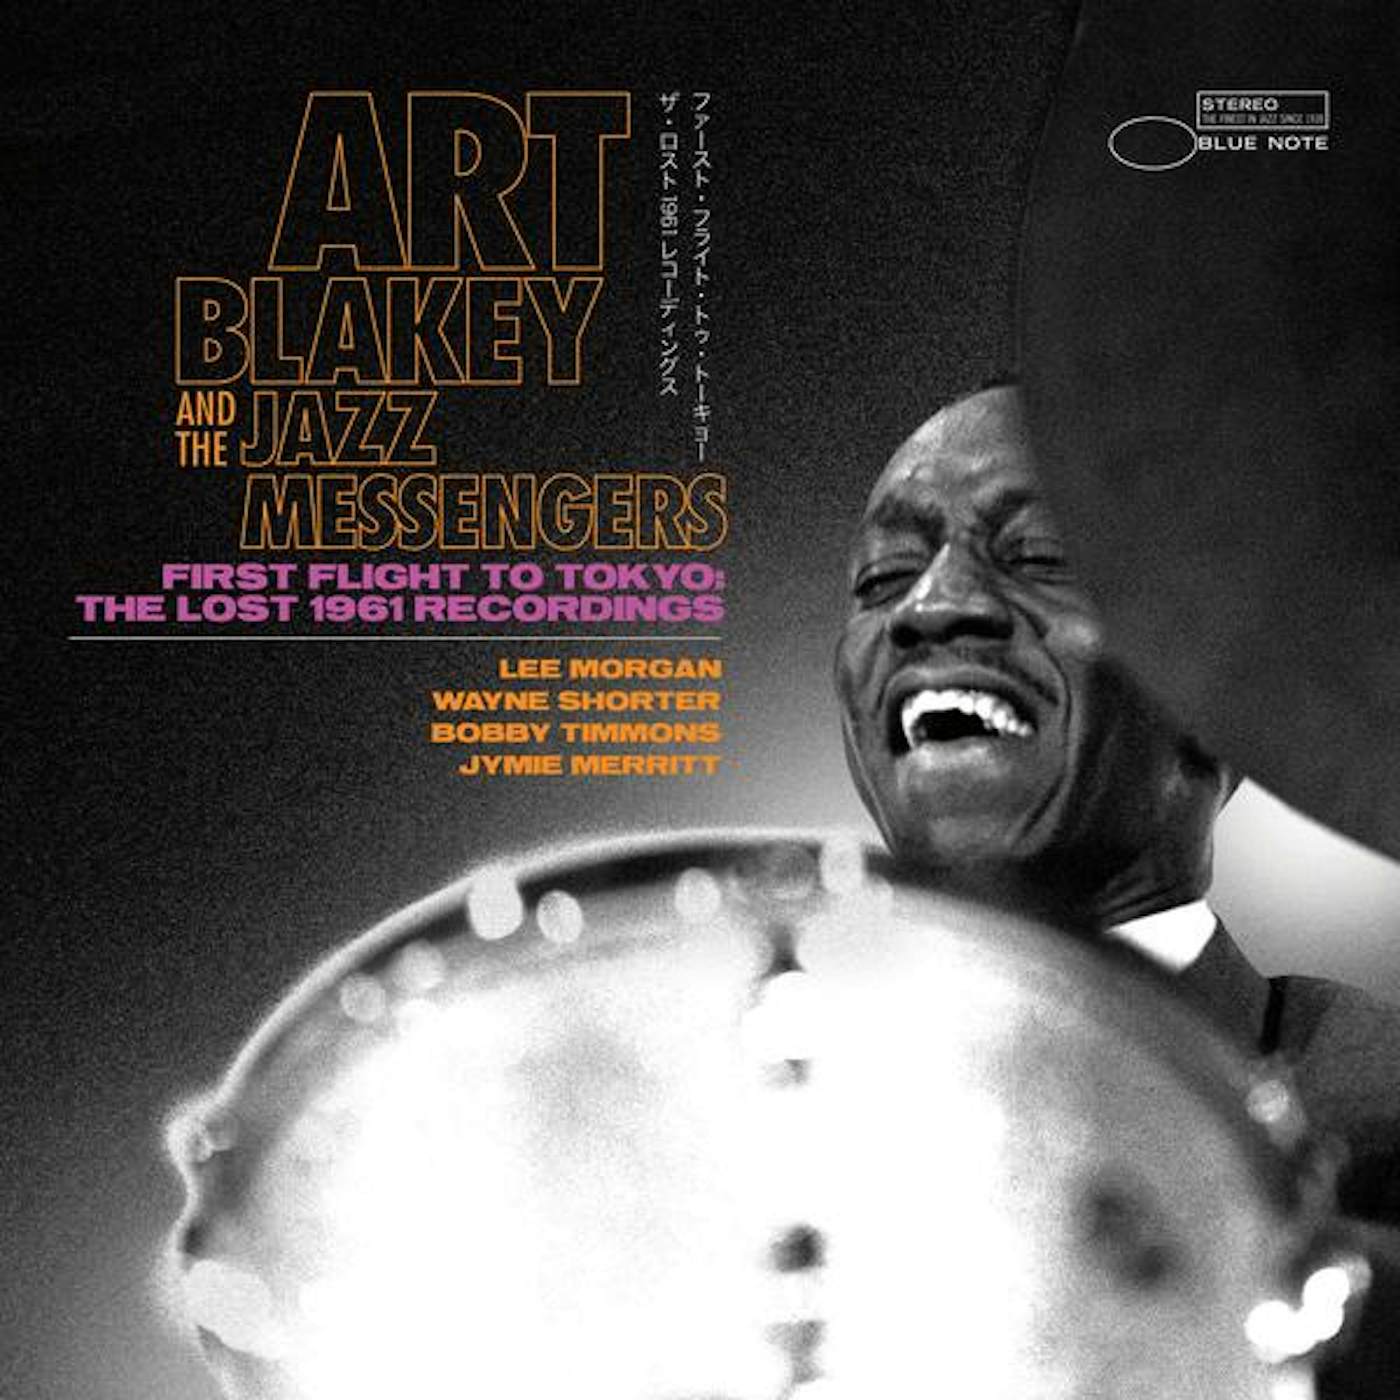 Art Blakey & The Jazz Messengers First Flight To Tokyo: The Lost 1961 Recordings Vinyl Record